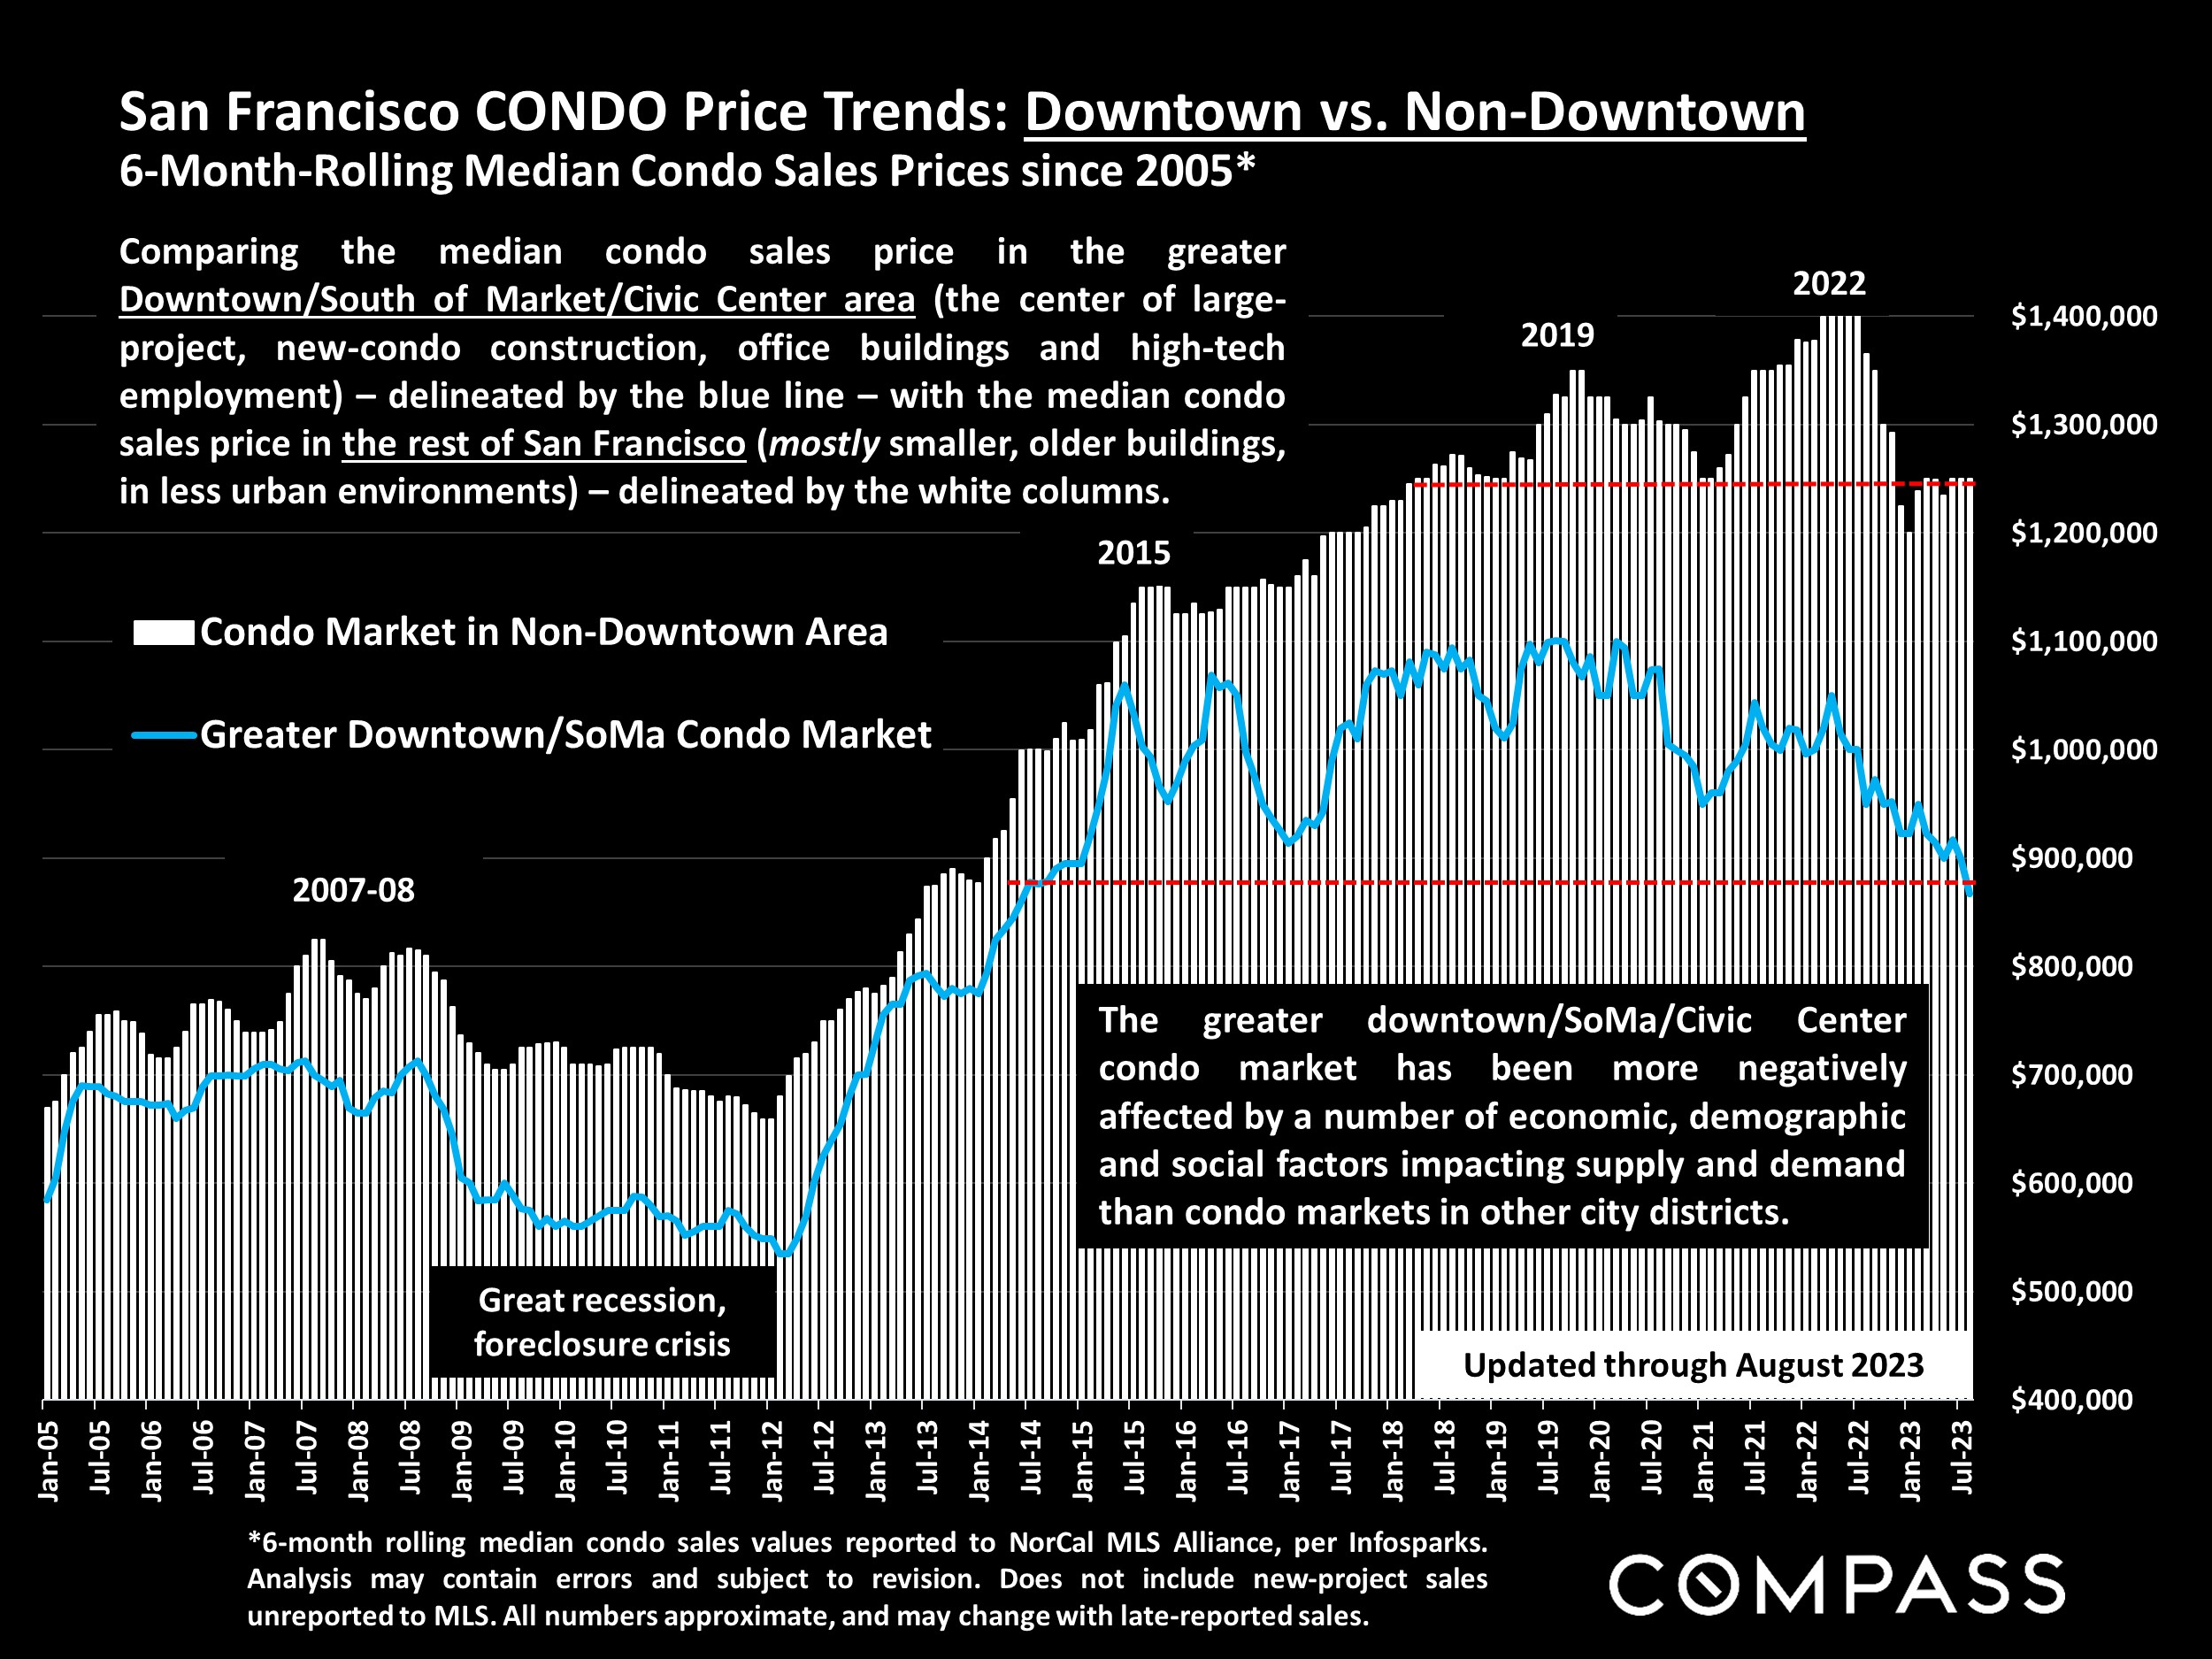 San Francisco CONDO Price Trends: Downtown vs. Non-Downtown 6-Month-Rolling Median Condo Sales Prices since 2005